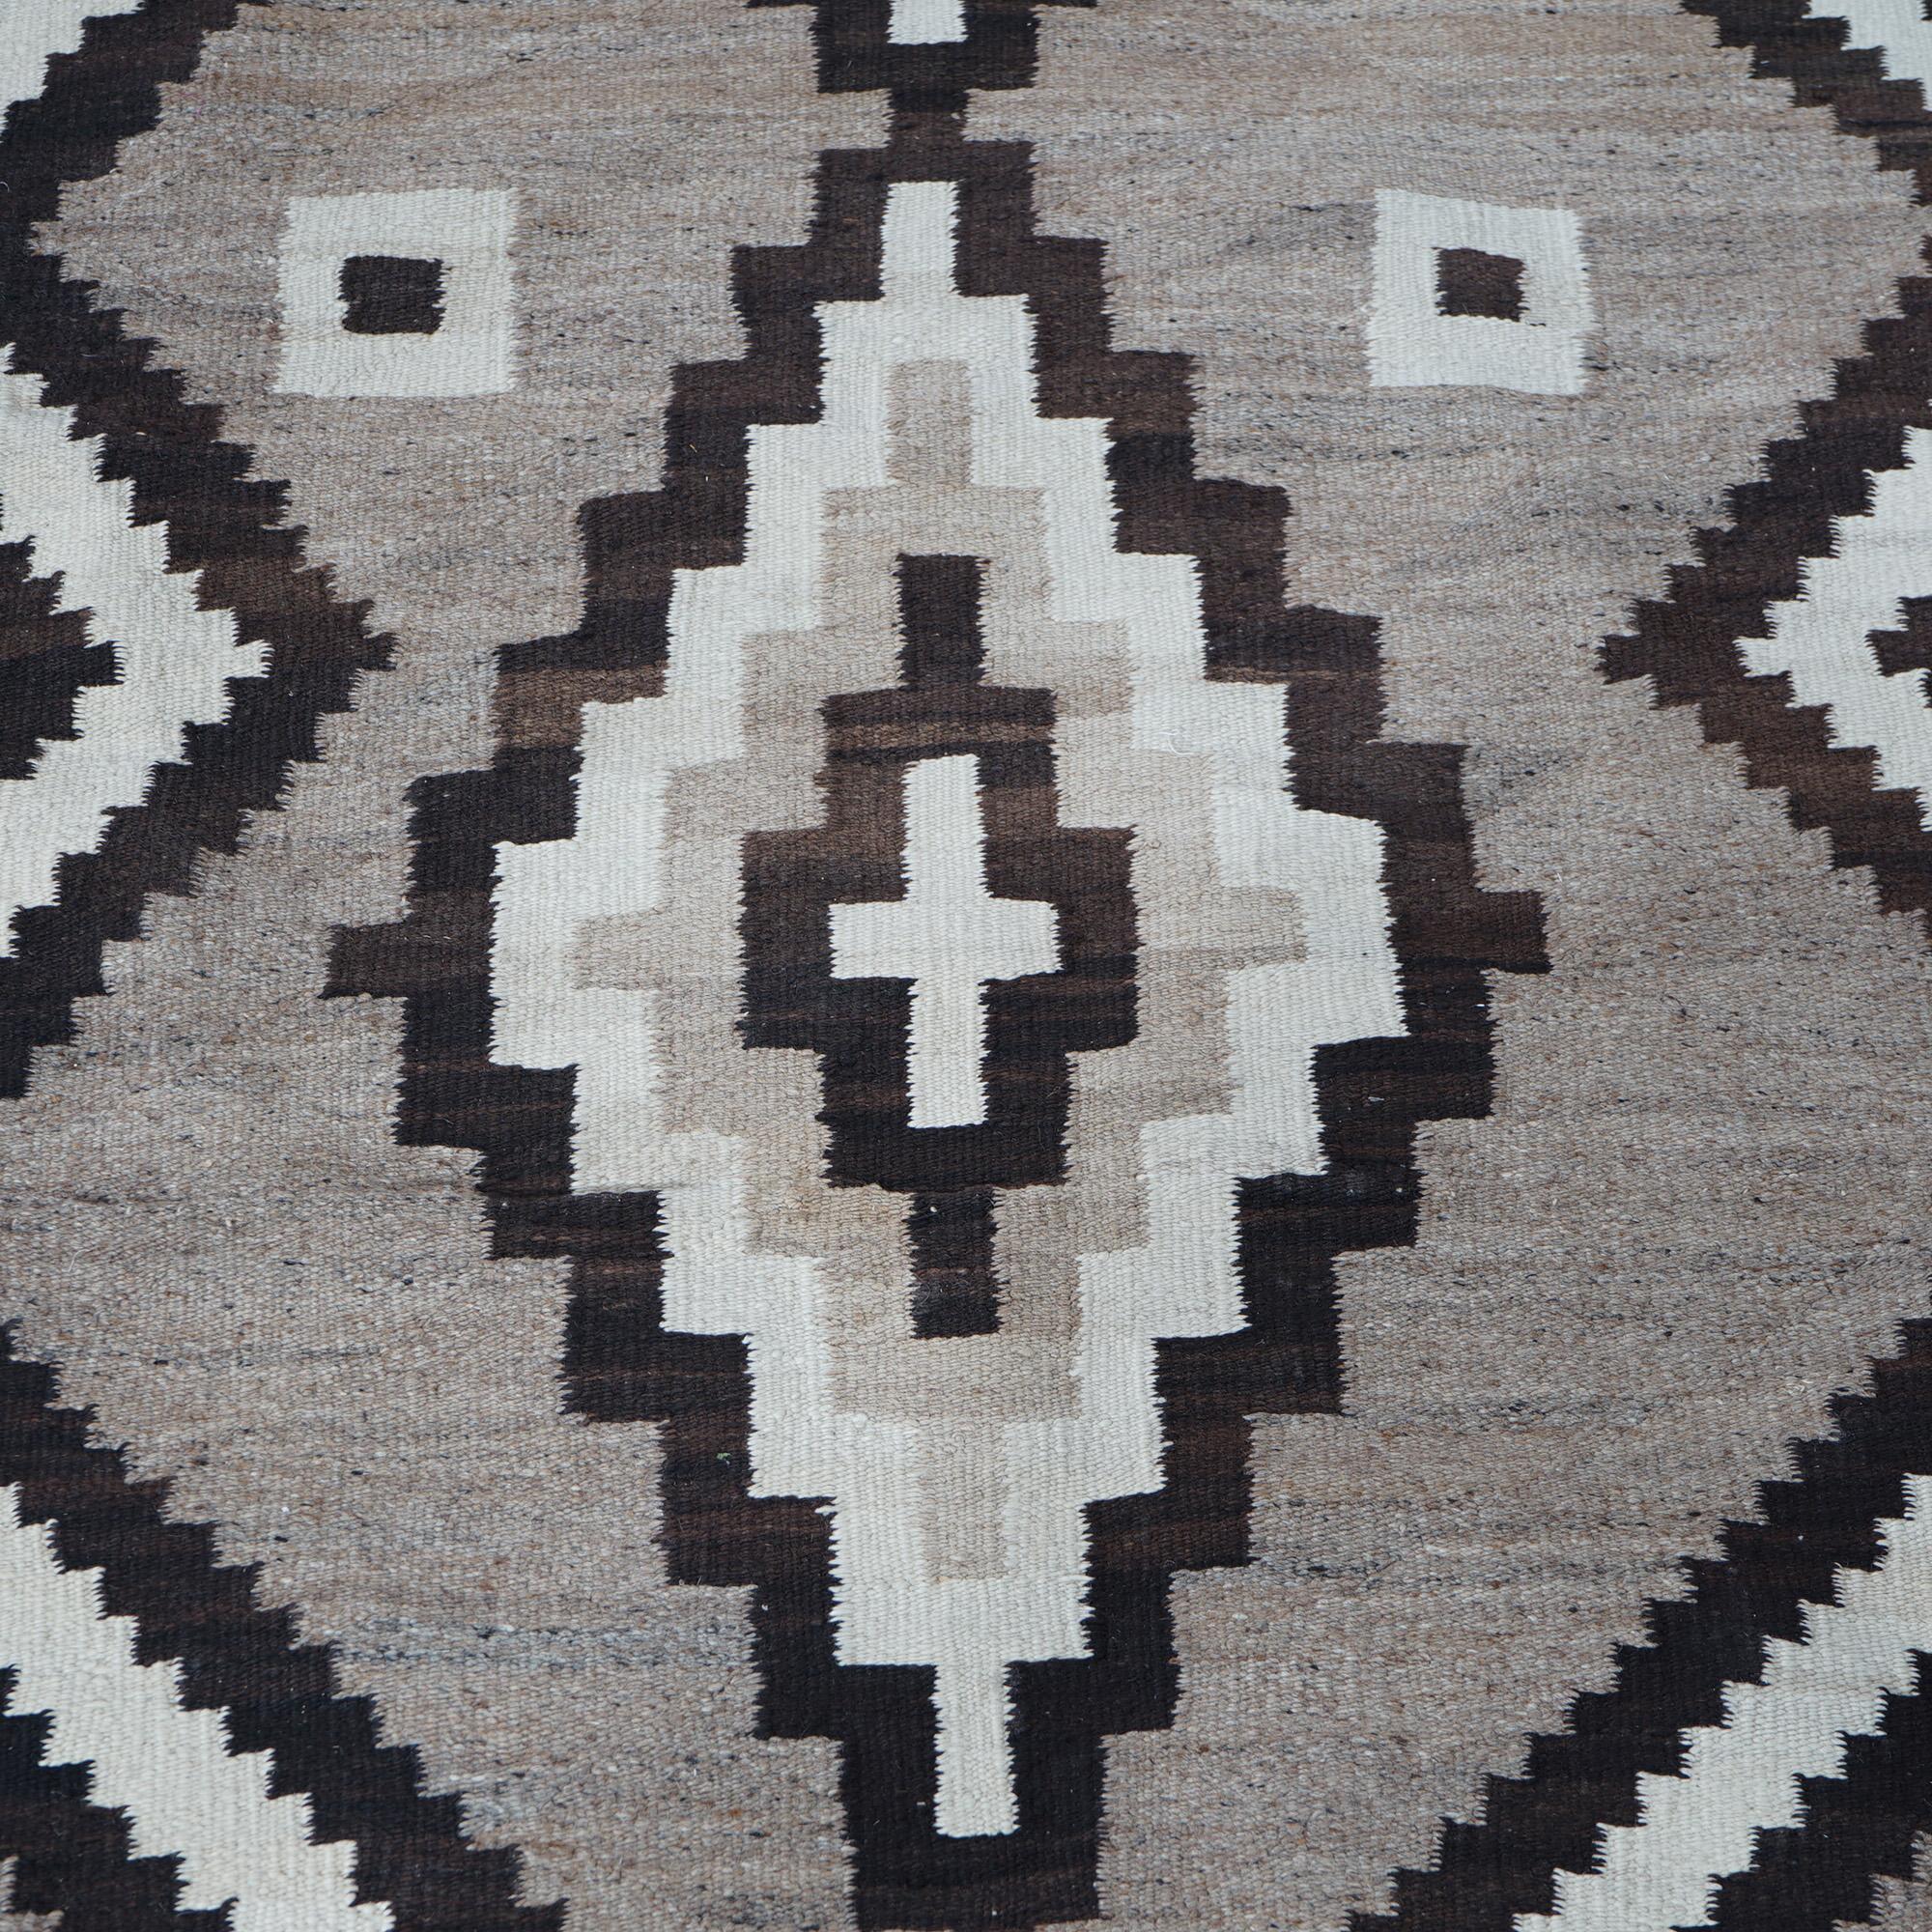 Antique Two Gray Hills Southwest American Indian Navajo Wool Rug Circa 1920 For Sale 1